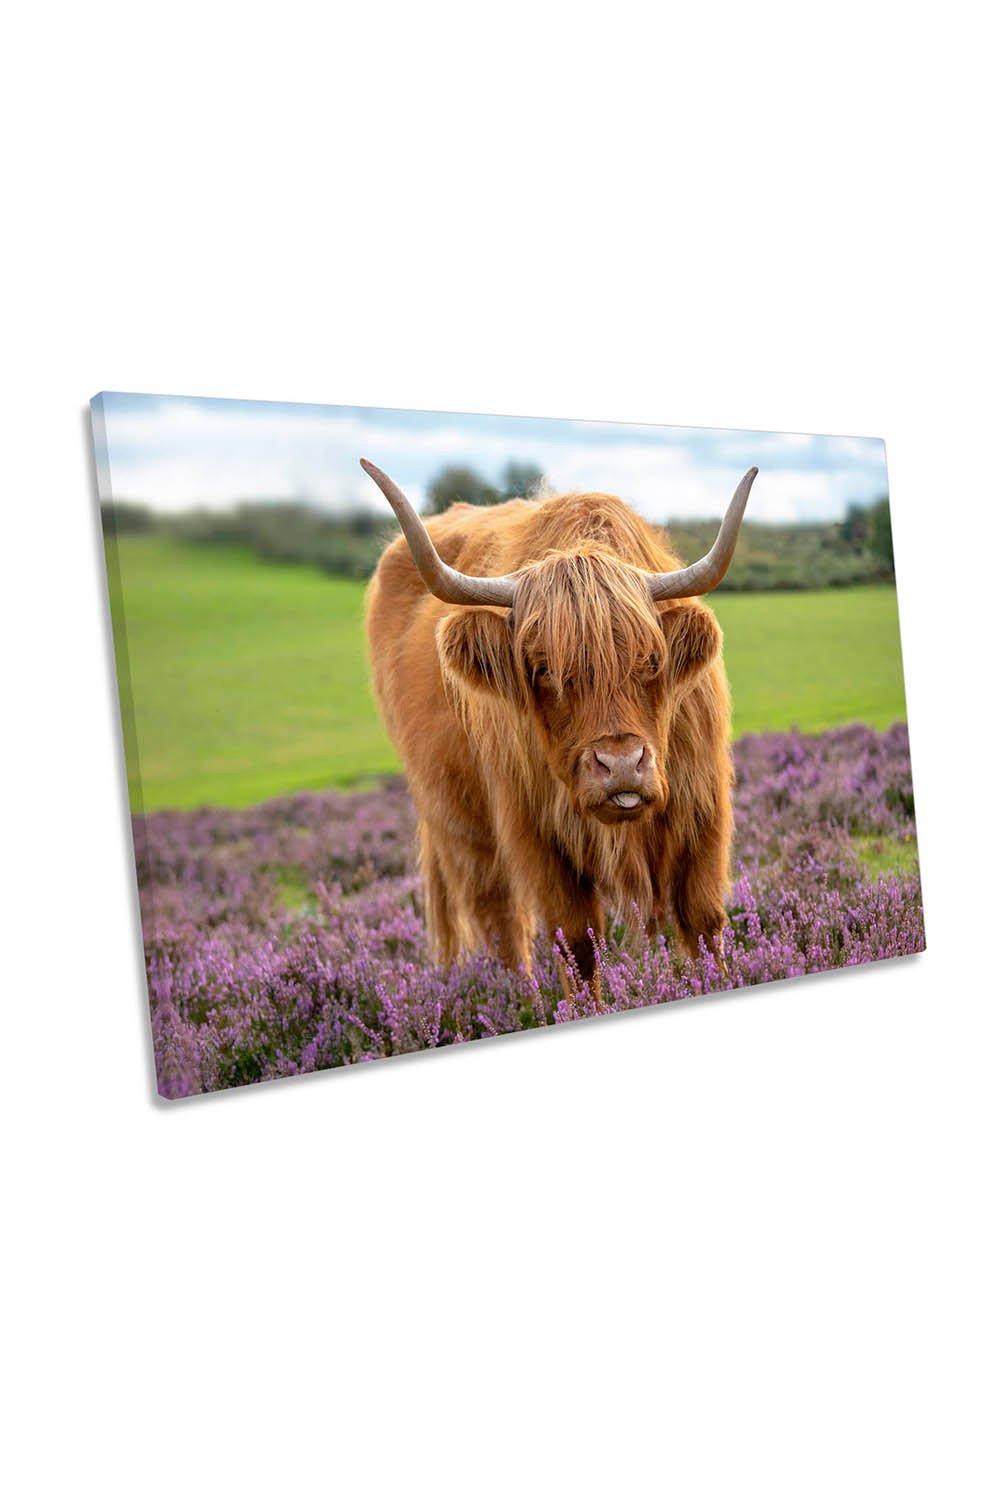 Scottish Highland Cow Cattle Bull Canvas Wall Art Picture Print